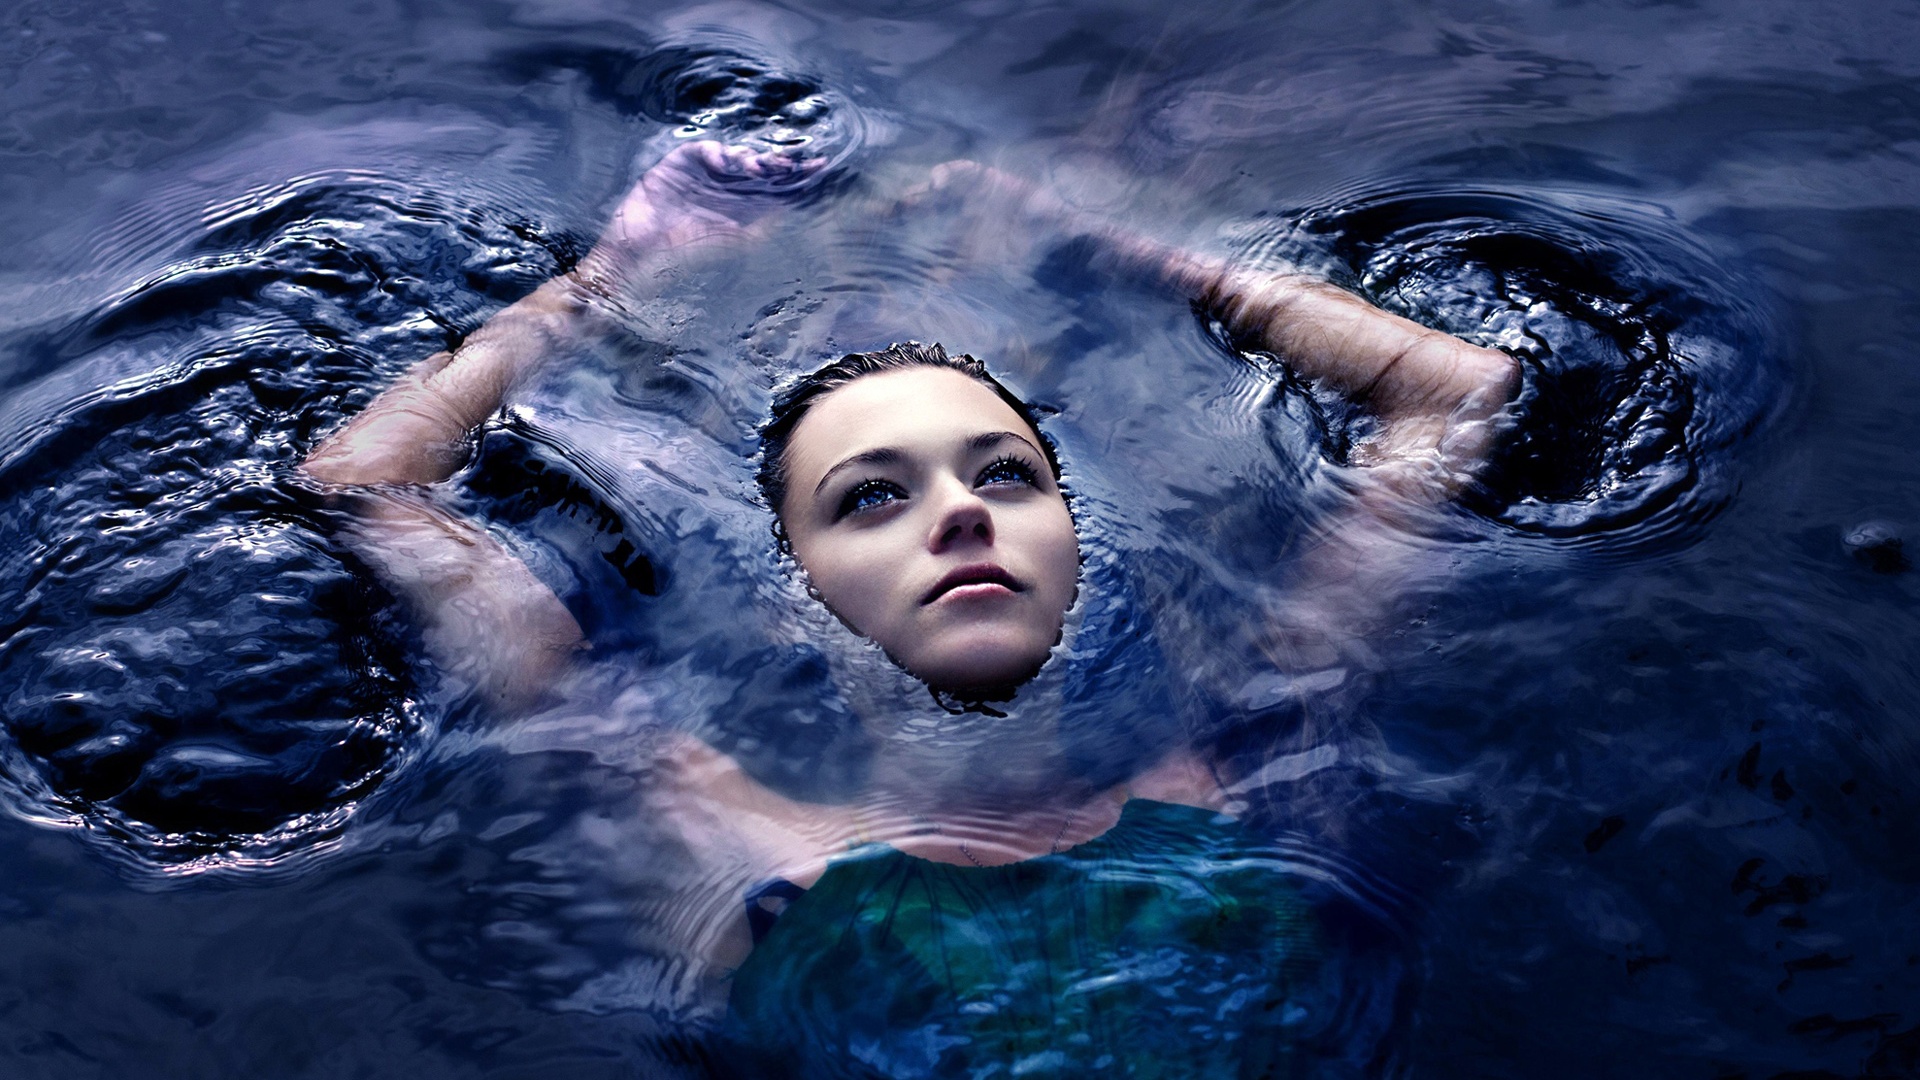 Wallpaper Girl in the water 1920x1200 HD Picture, Image